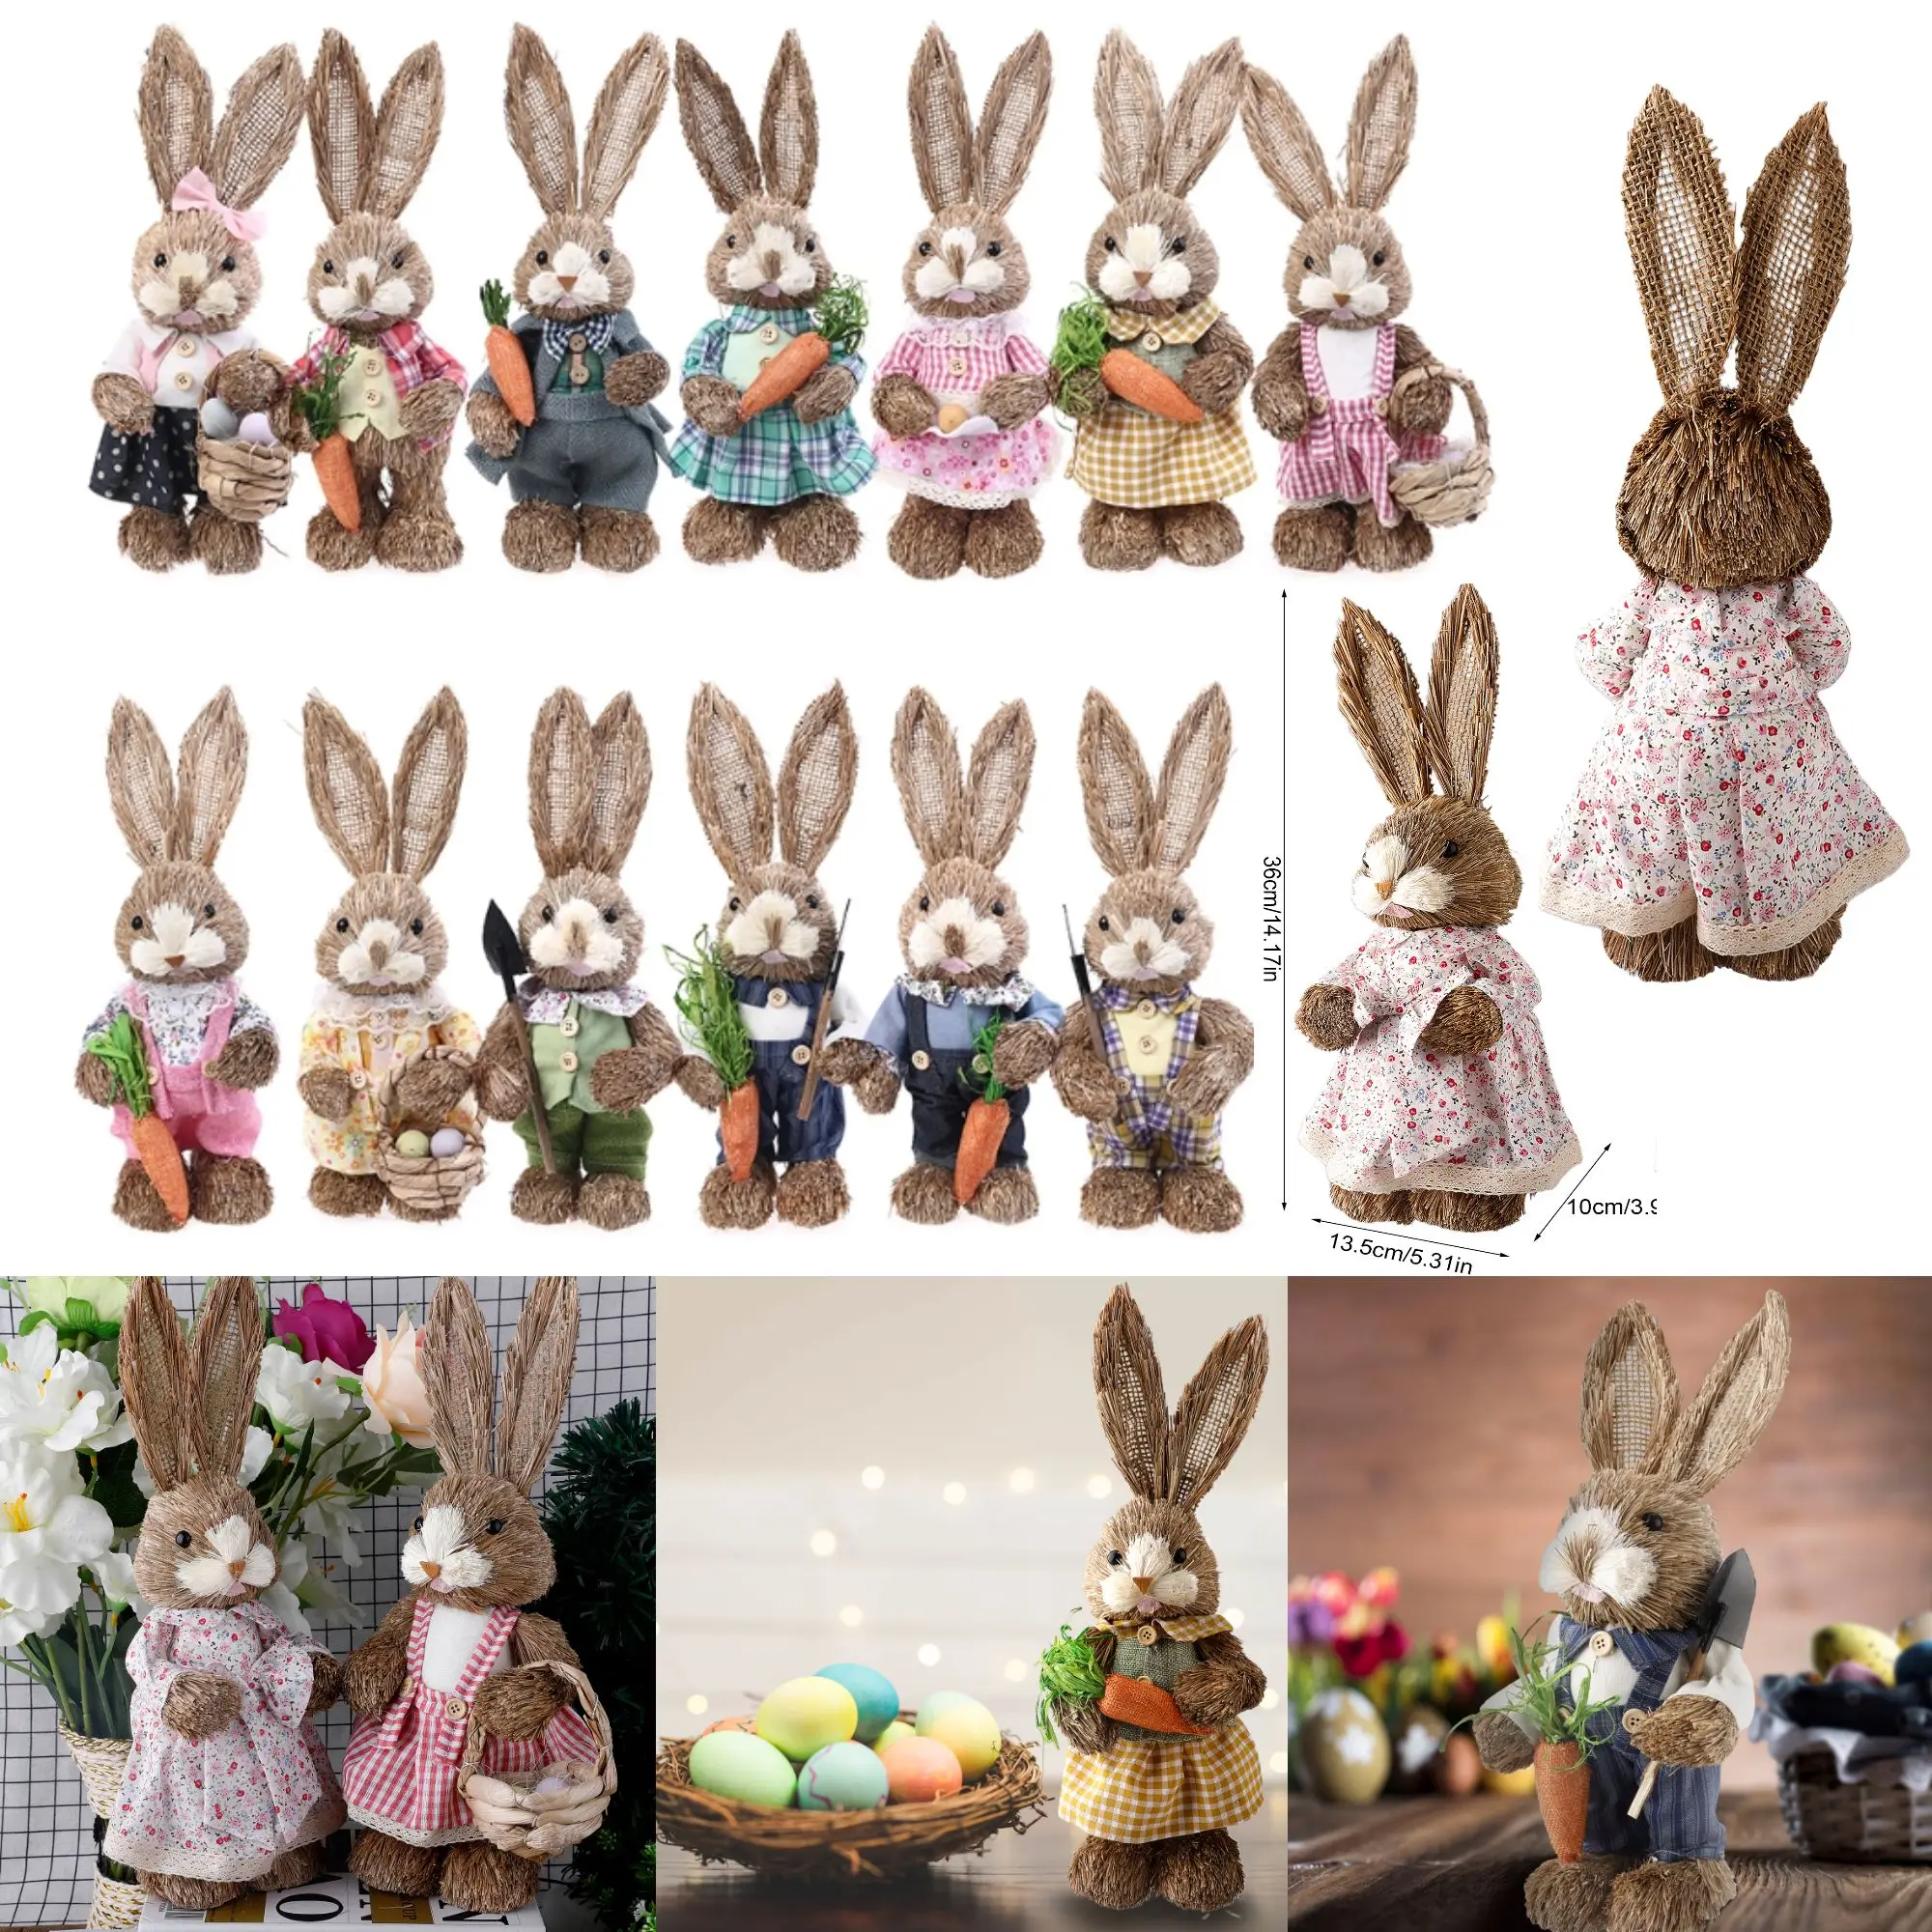 https://ae01.alicdn.com/kf/S27068005f80f4569a489f47cc373021cp/Cute-Artificial-Straw-Bunny-Decorations-Easter-Theme-Party-Home-Garden-Rabbit-Simulation-Props-Crafts-Ornaments-Decor.jpg